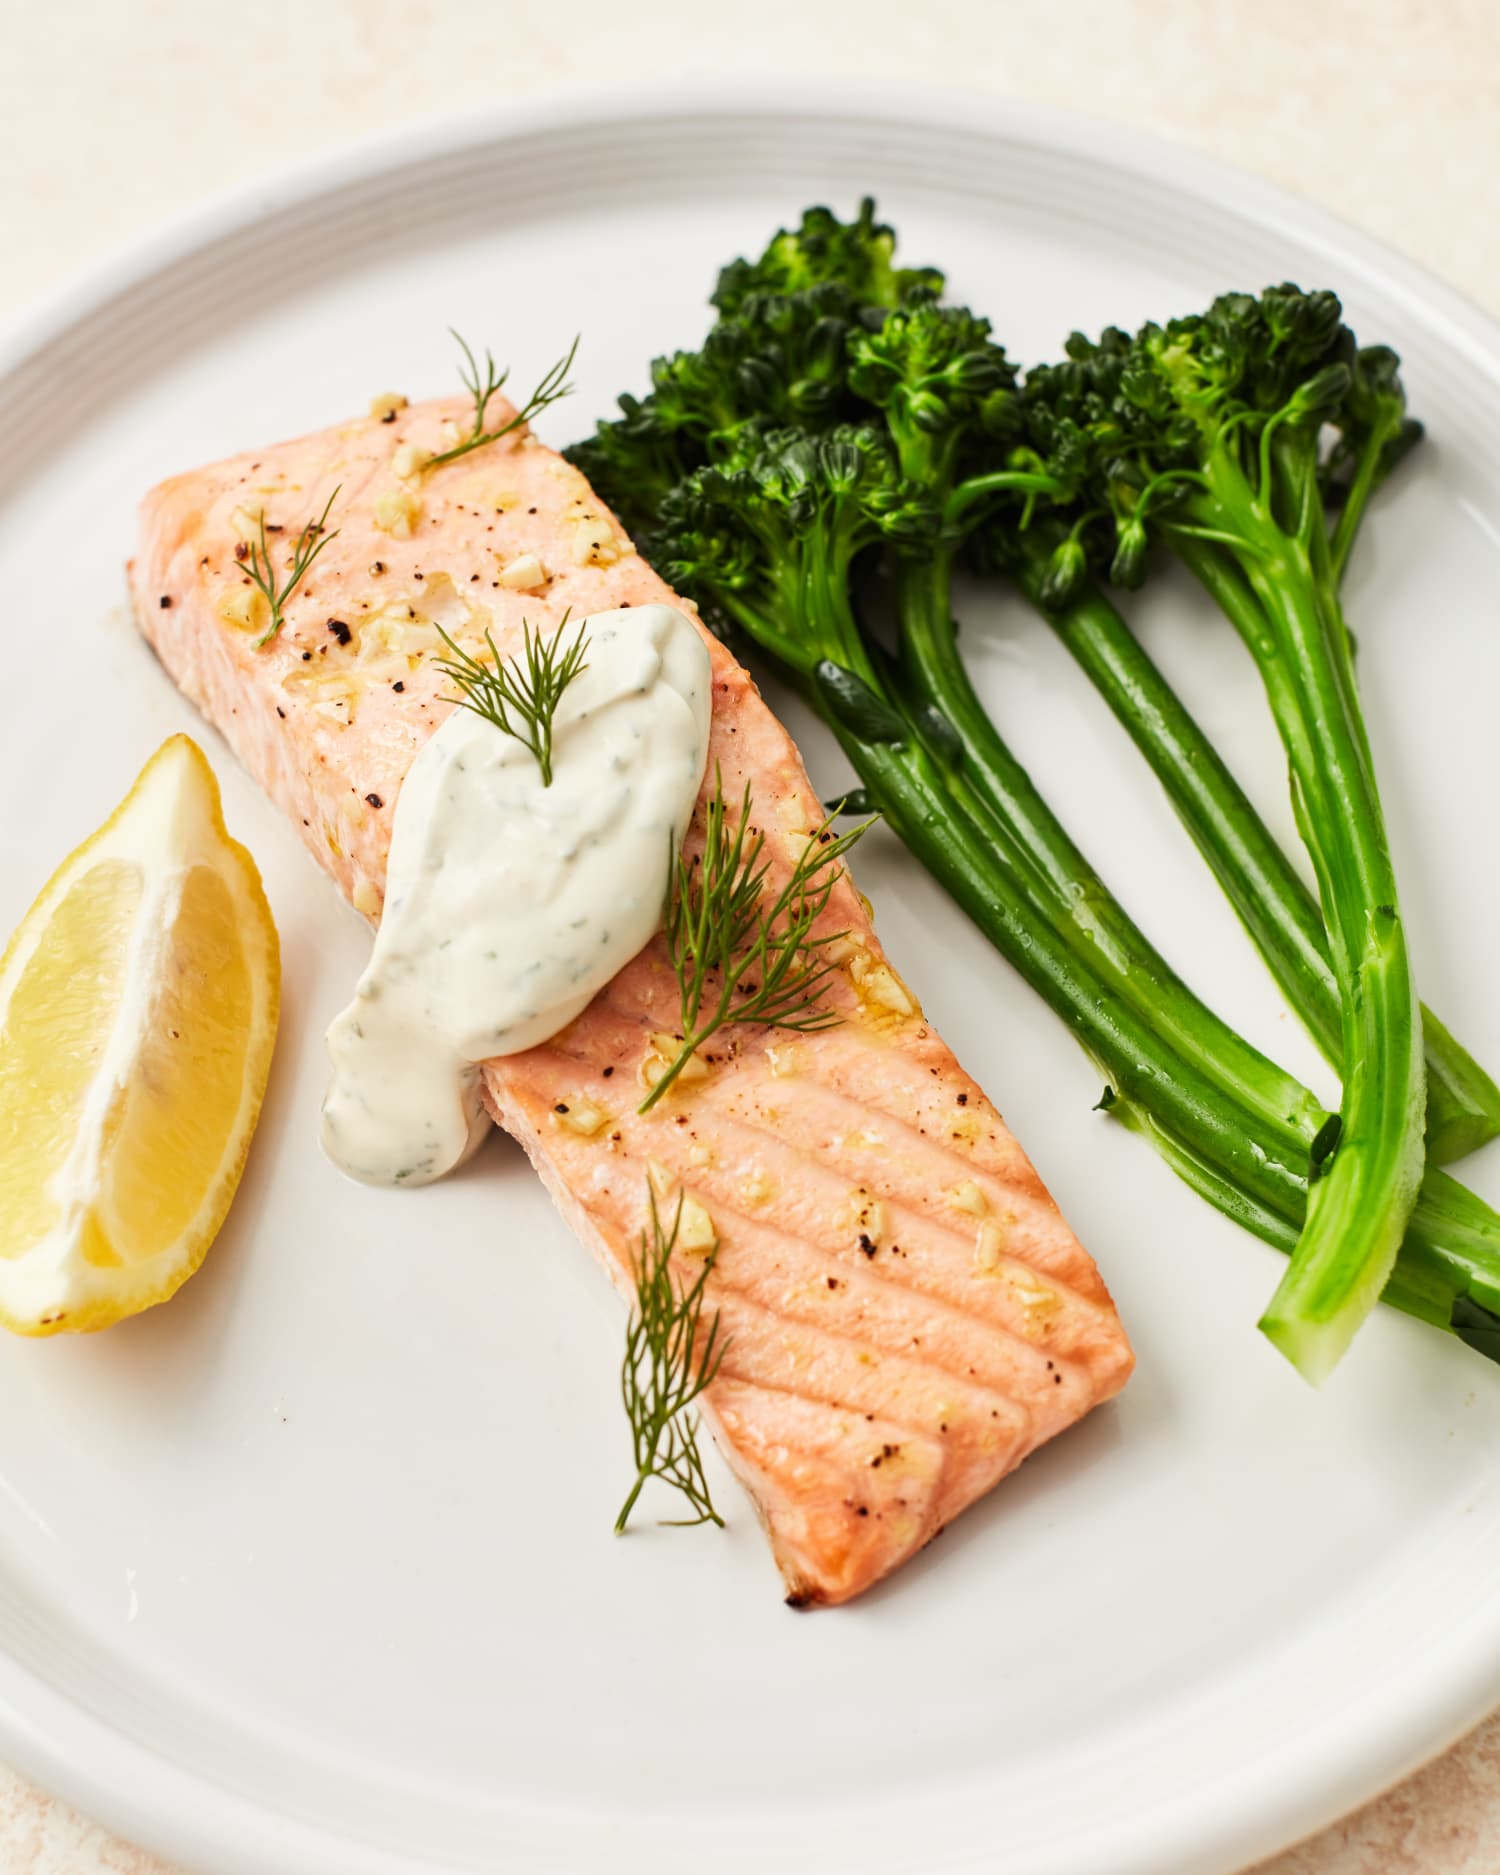 Fresh Dill Is the Star of This Springtime Salmon